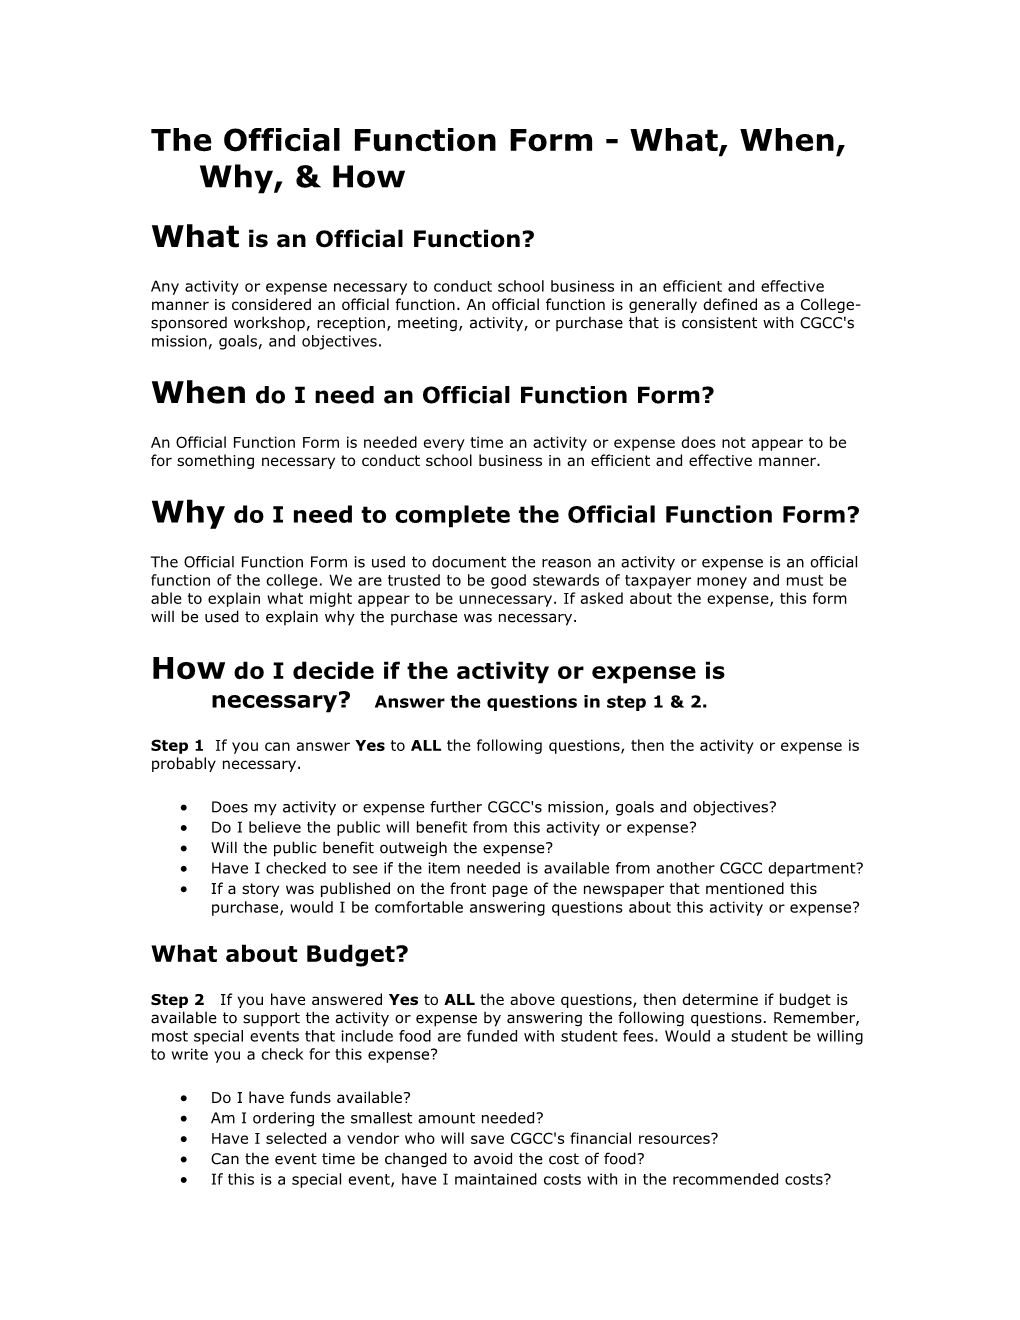 The Official Function Form - What, When, Why, & How